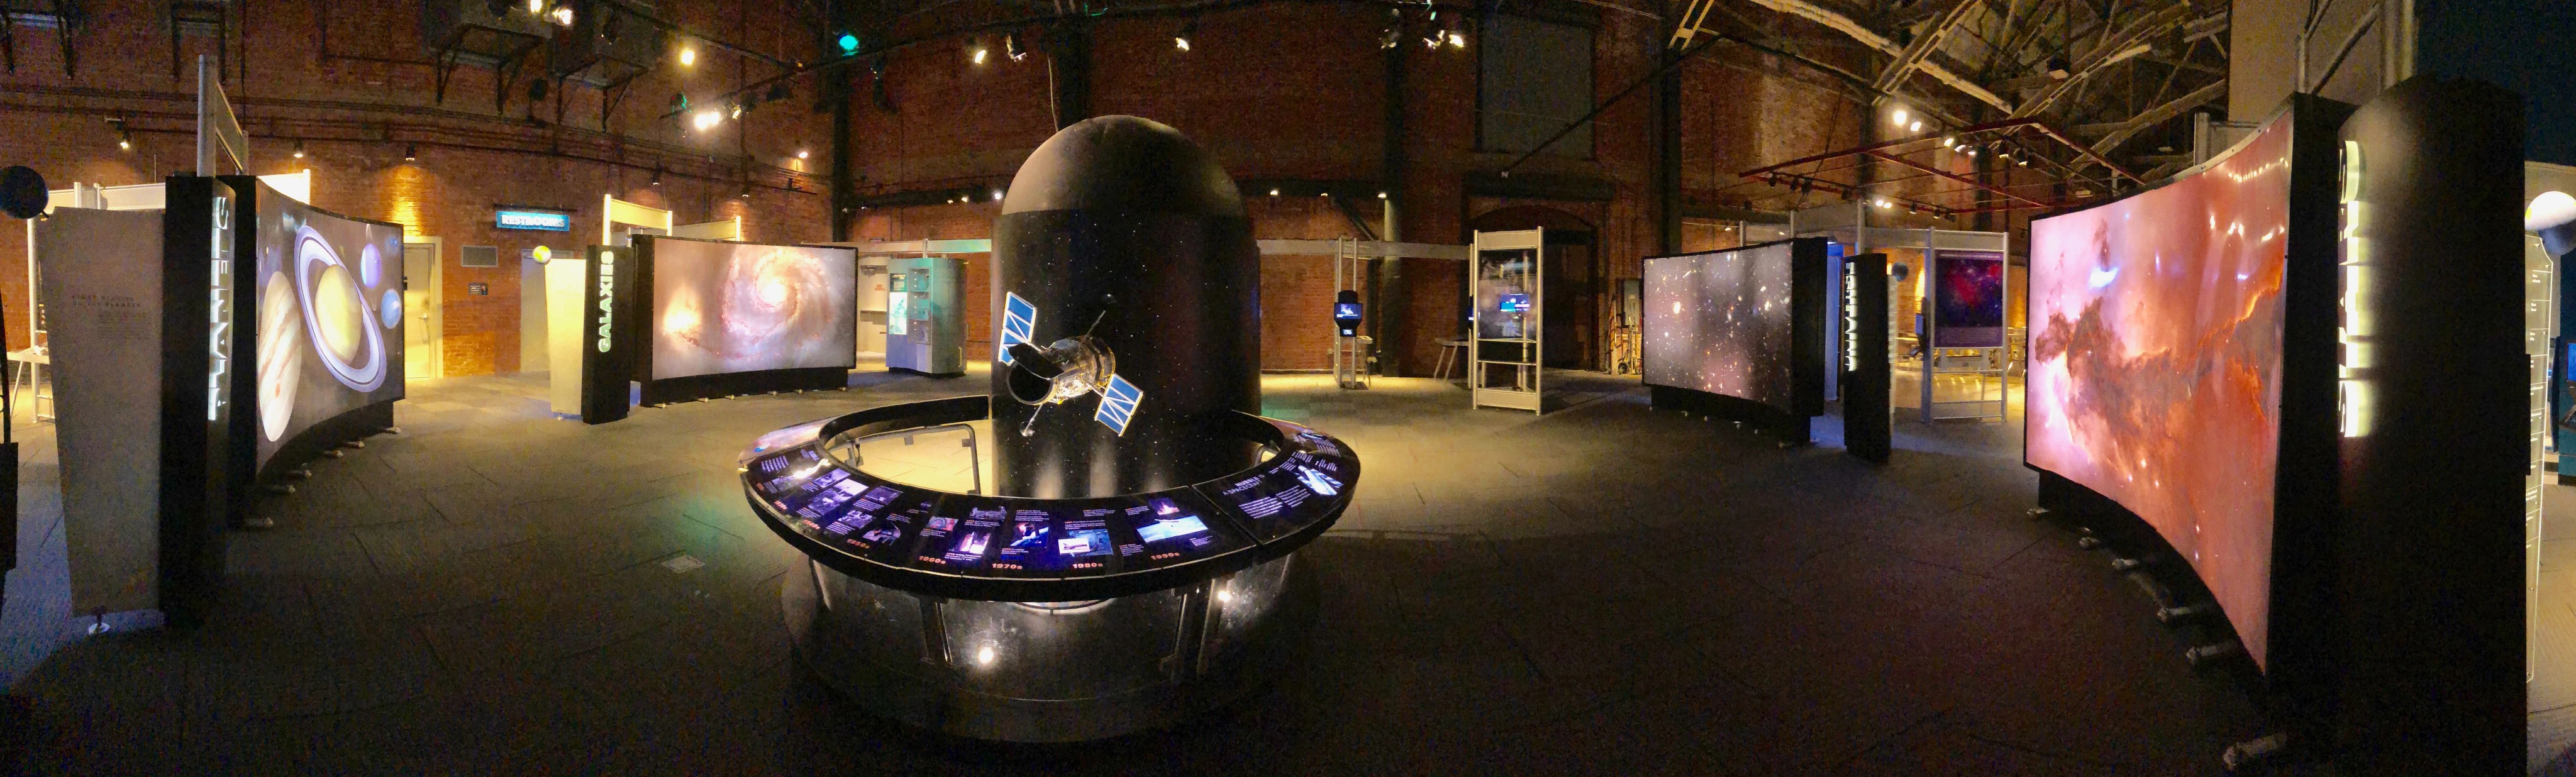 A panorama view of the Hubble traveling exhibit with its center piece model and four science stations.